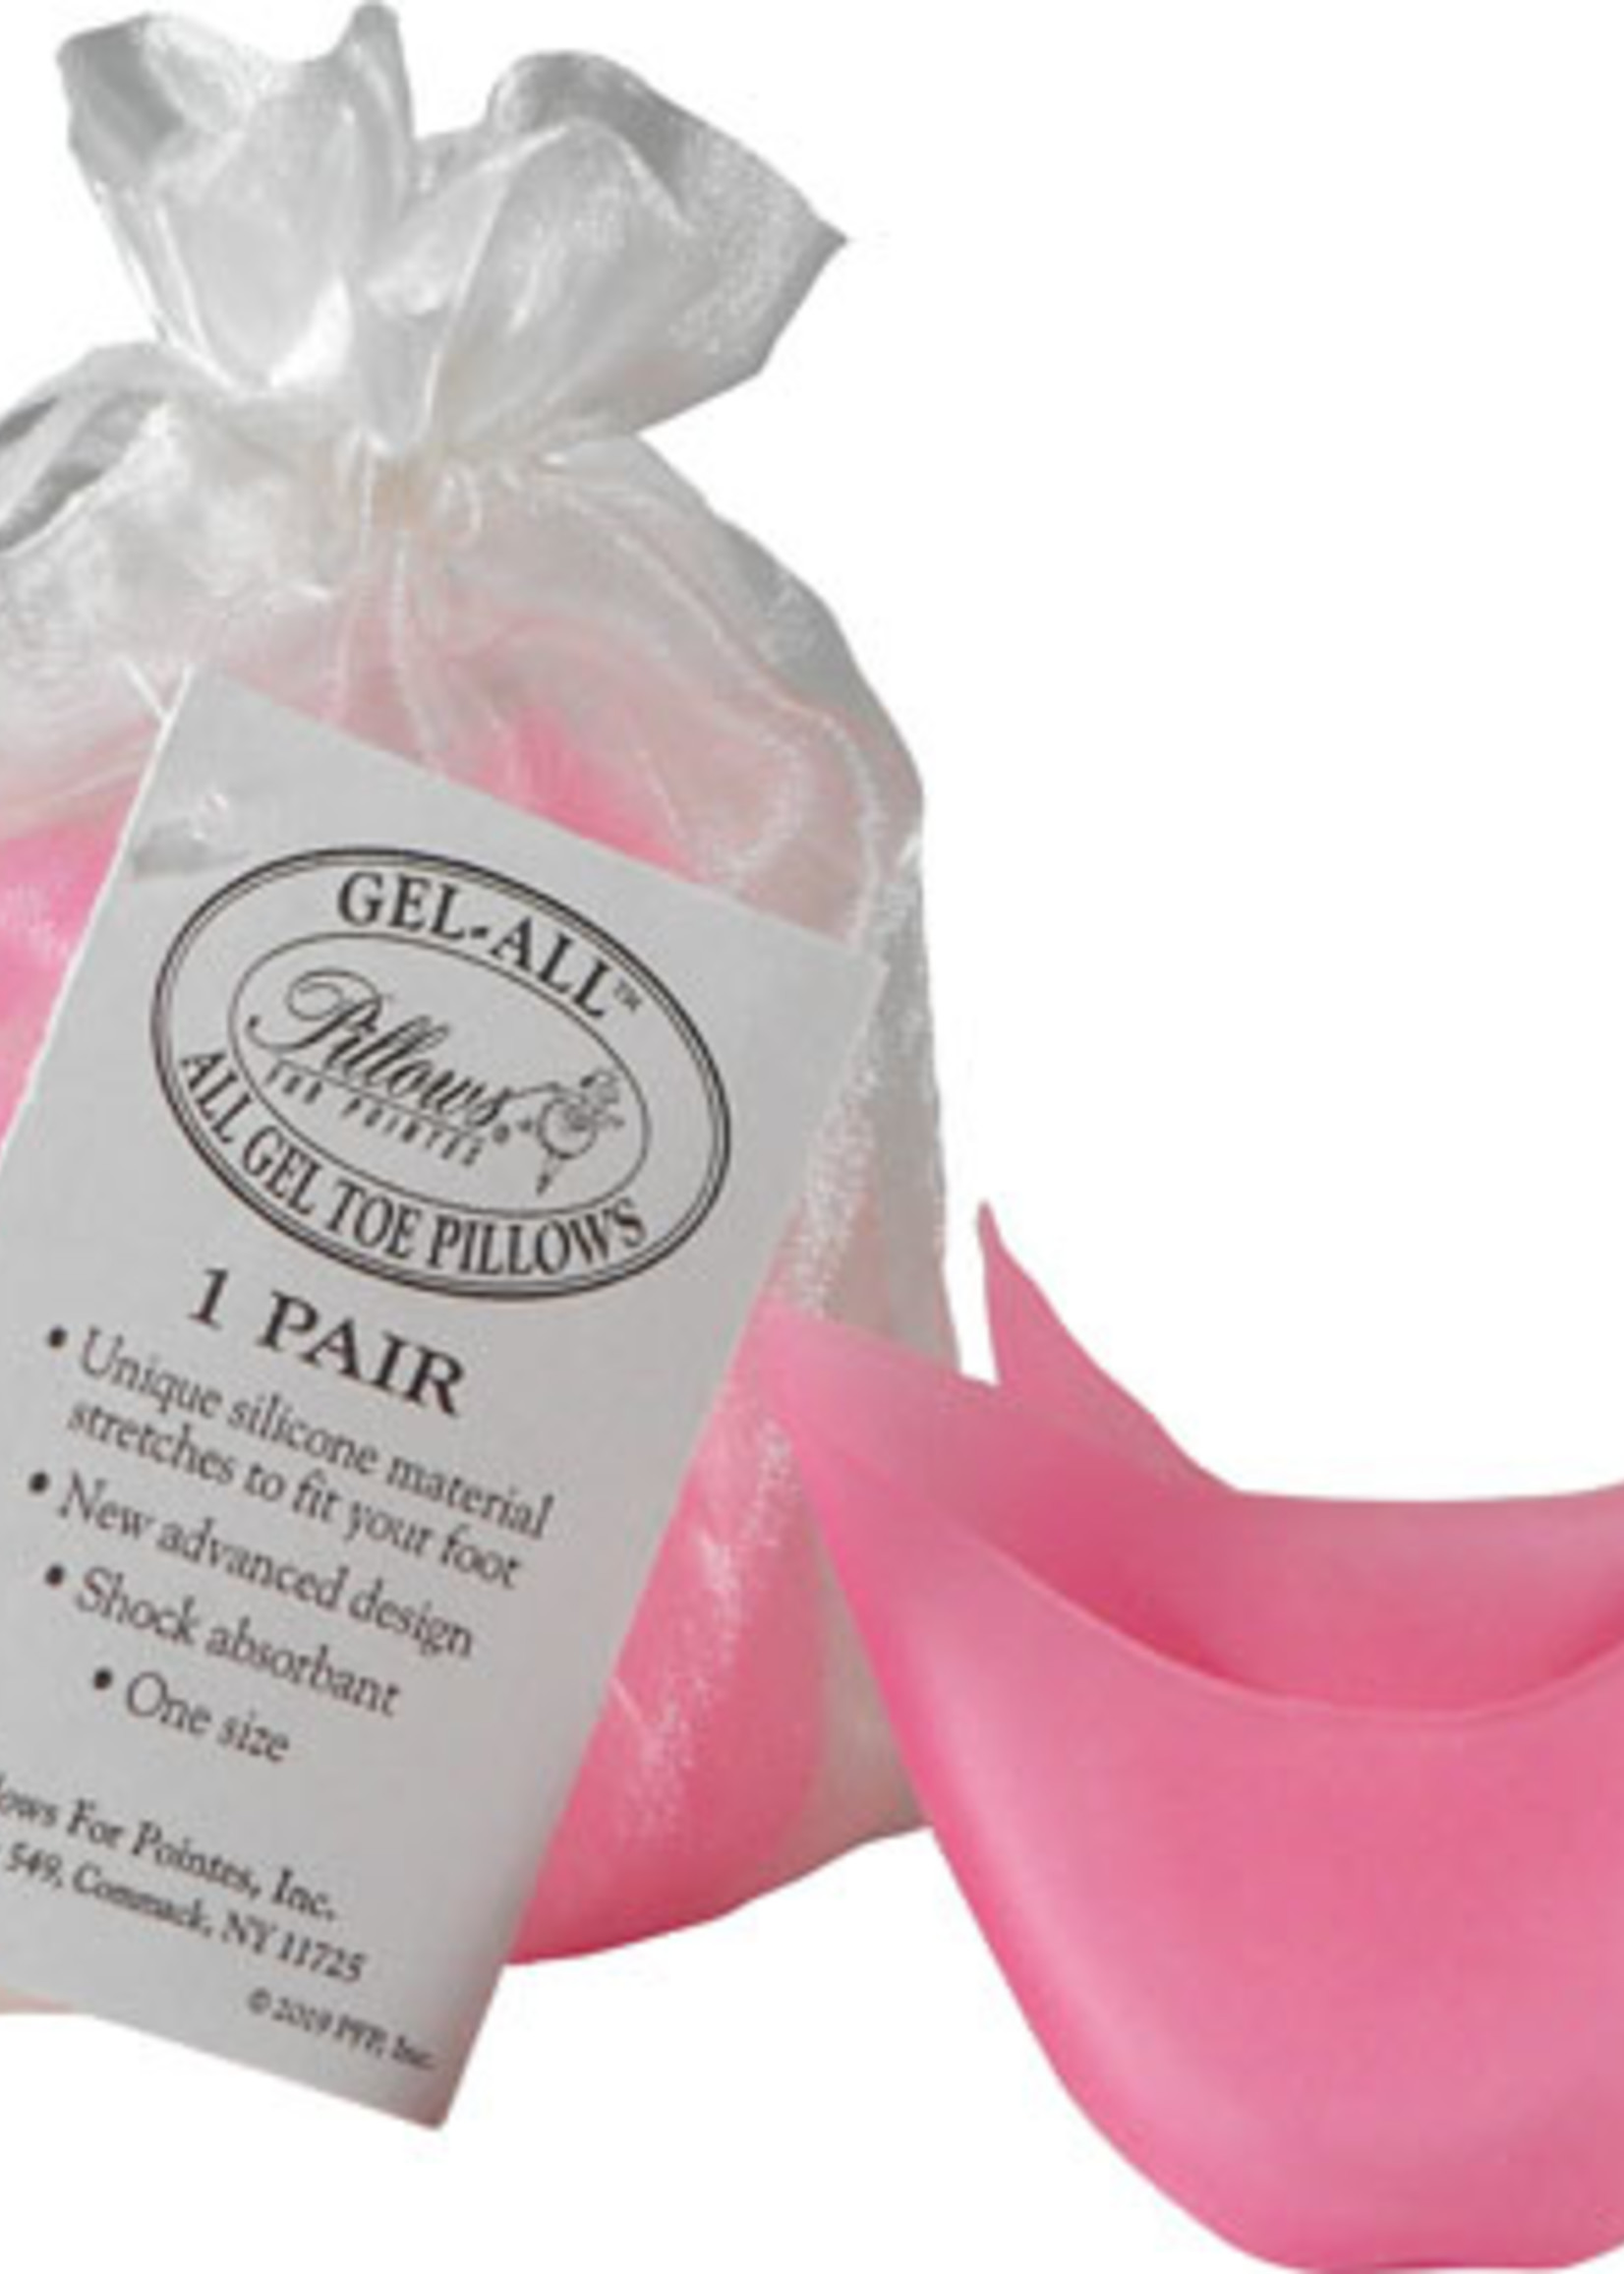 Pillows for Pointe Pillows for Pointe Gel-All Toe Pillows